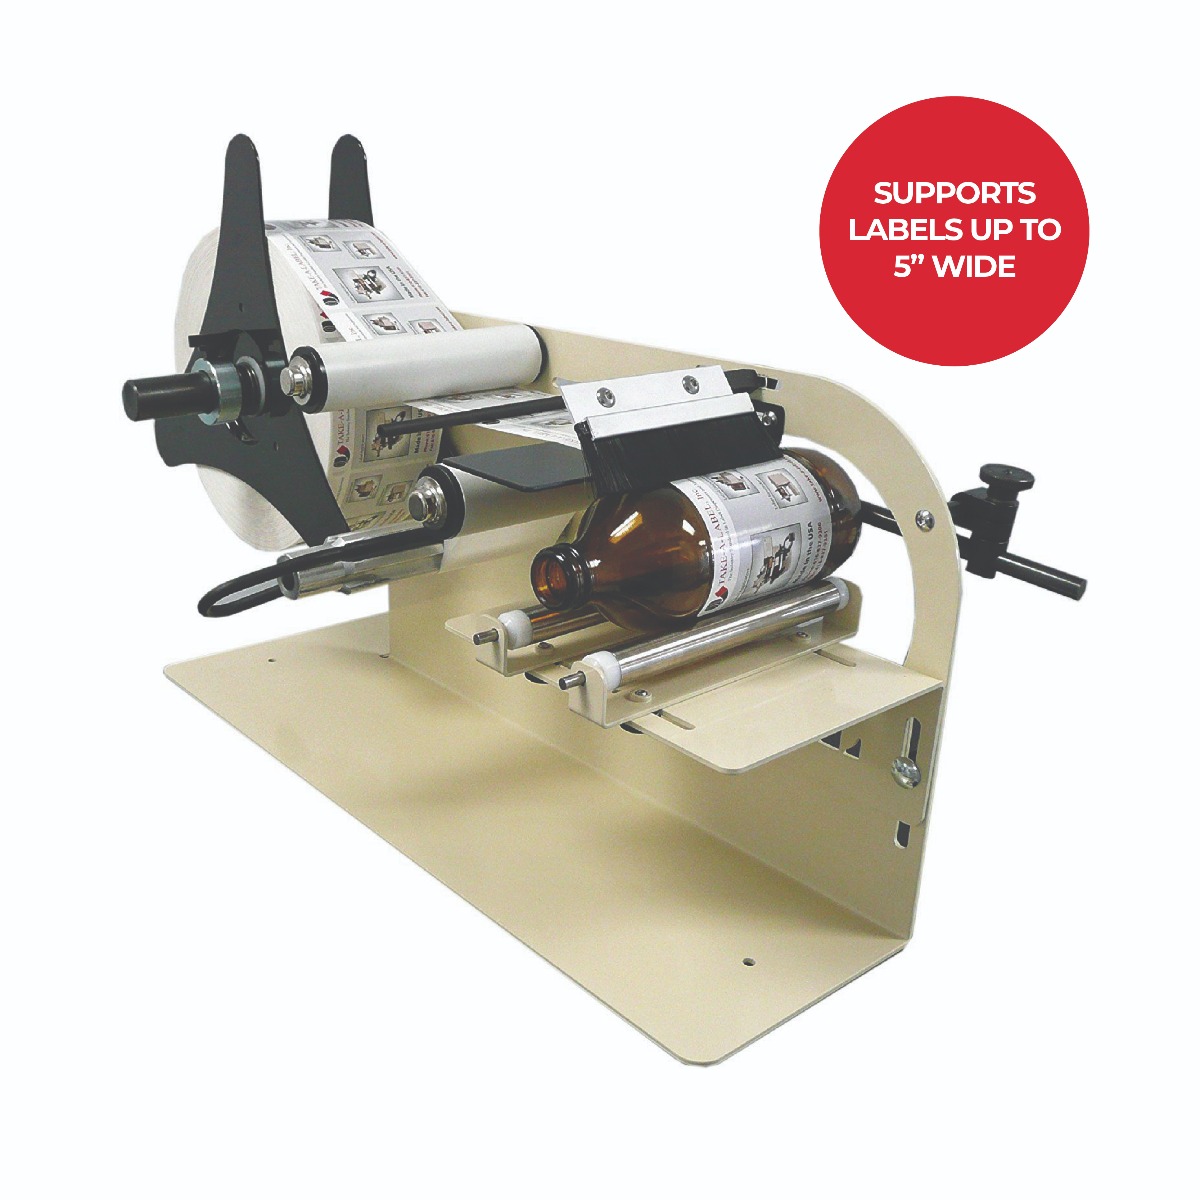 TAL-1100MR Manual Round Product Label Applicator